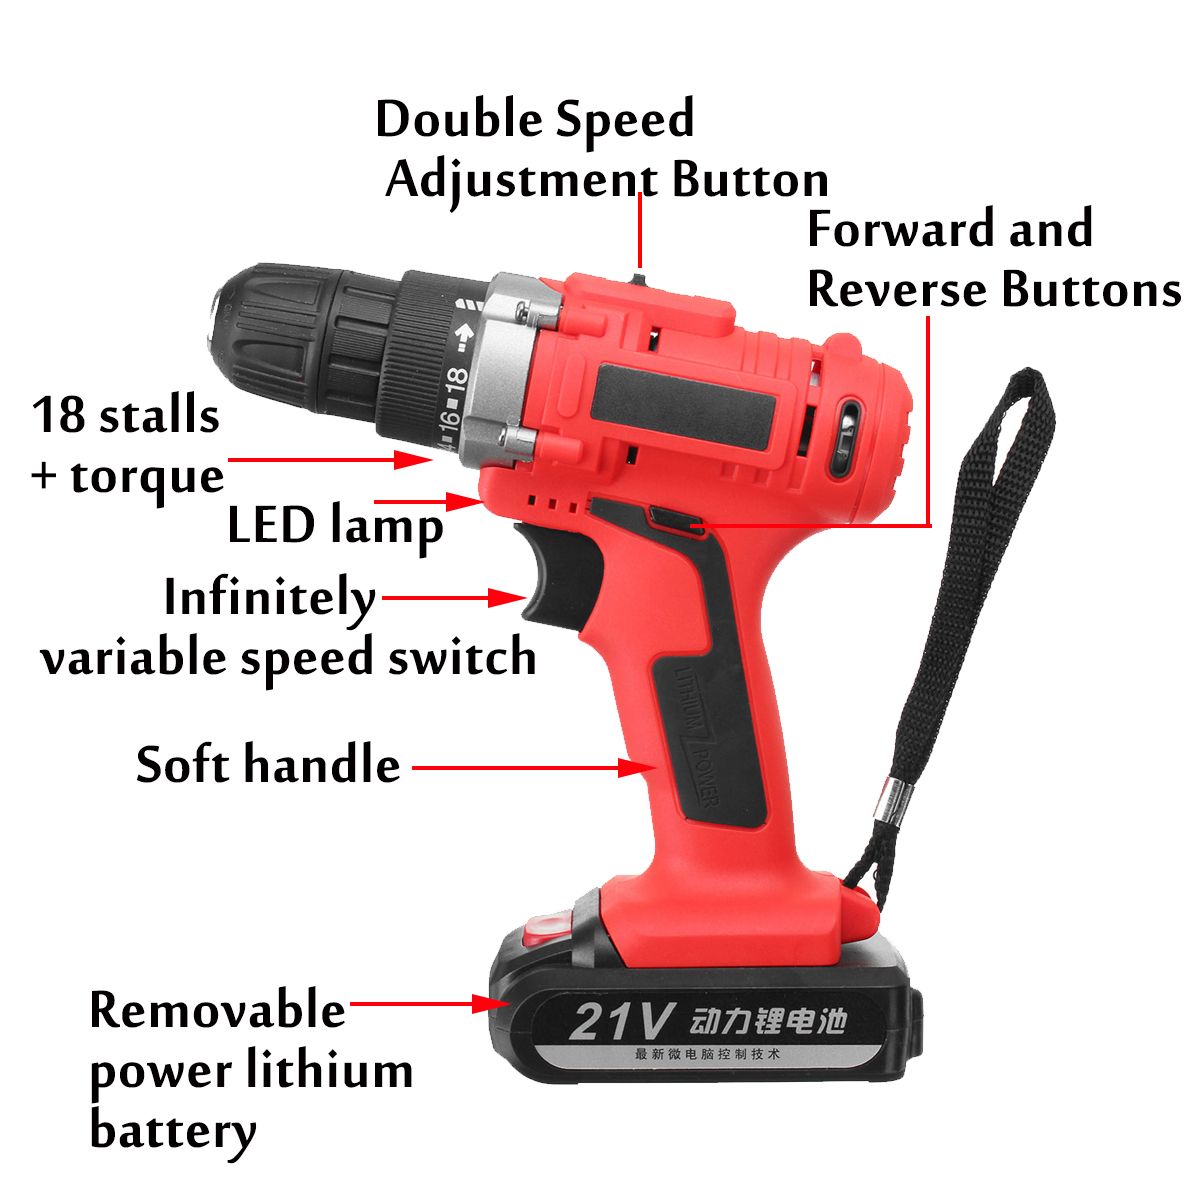 300W-21V-LED-Cordless-Electric-Drill-Screwdriver-1500mAh-Rechargeable-Li-Ion-Battery-Repair-Tools-1421882